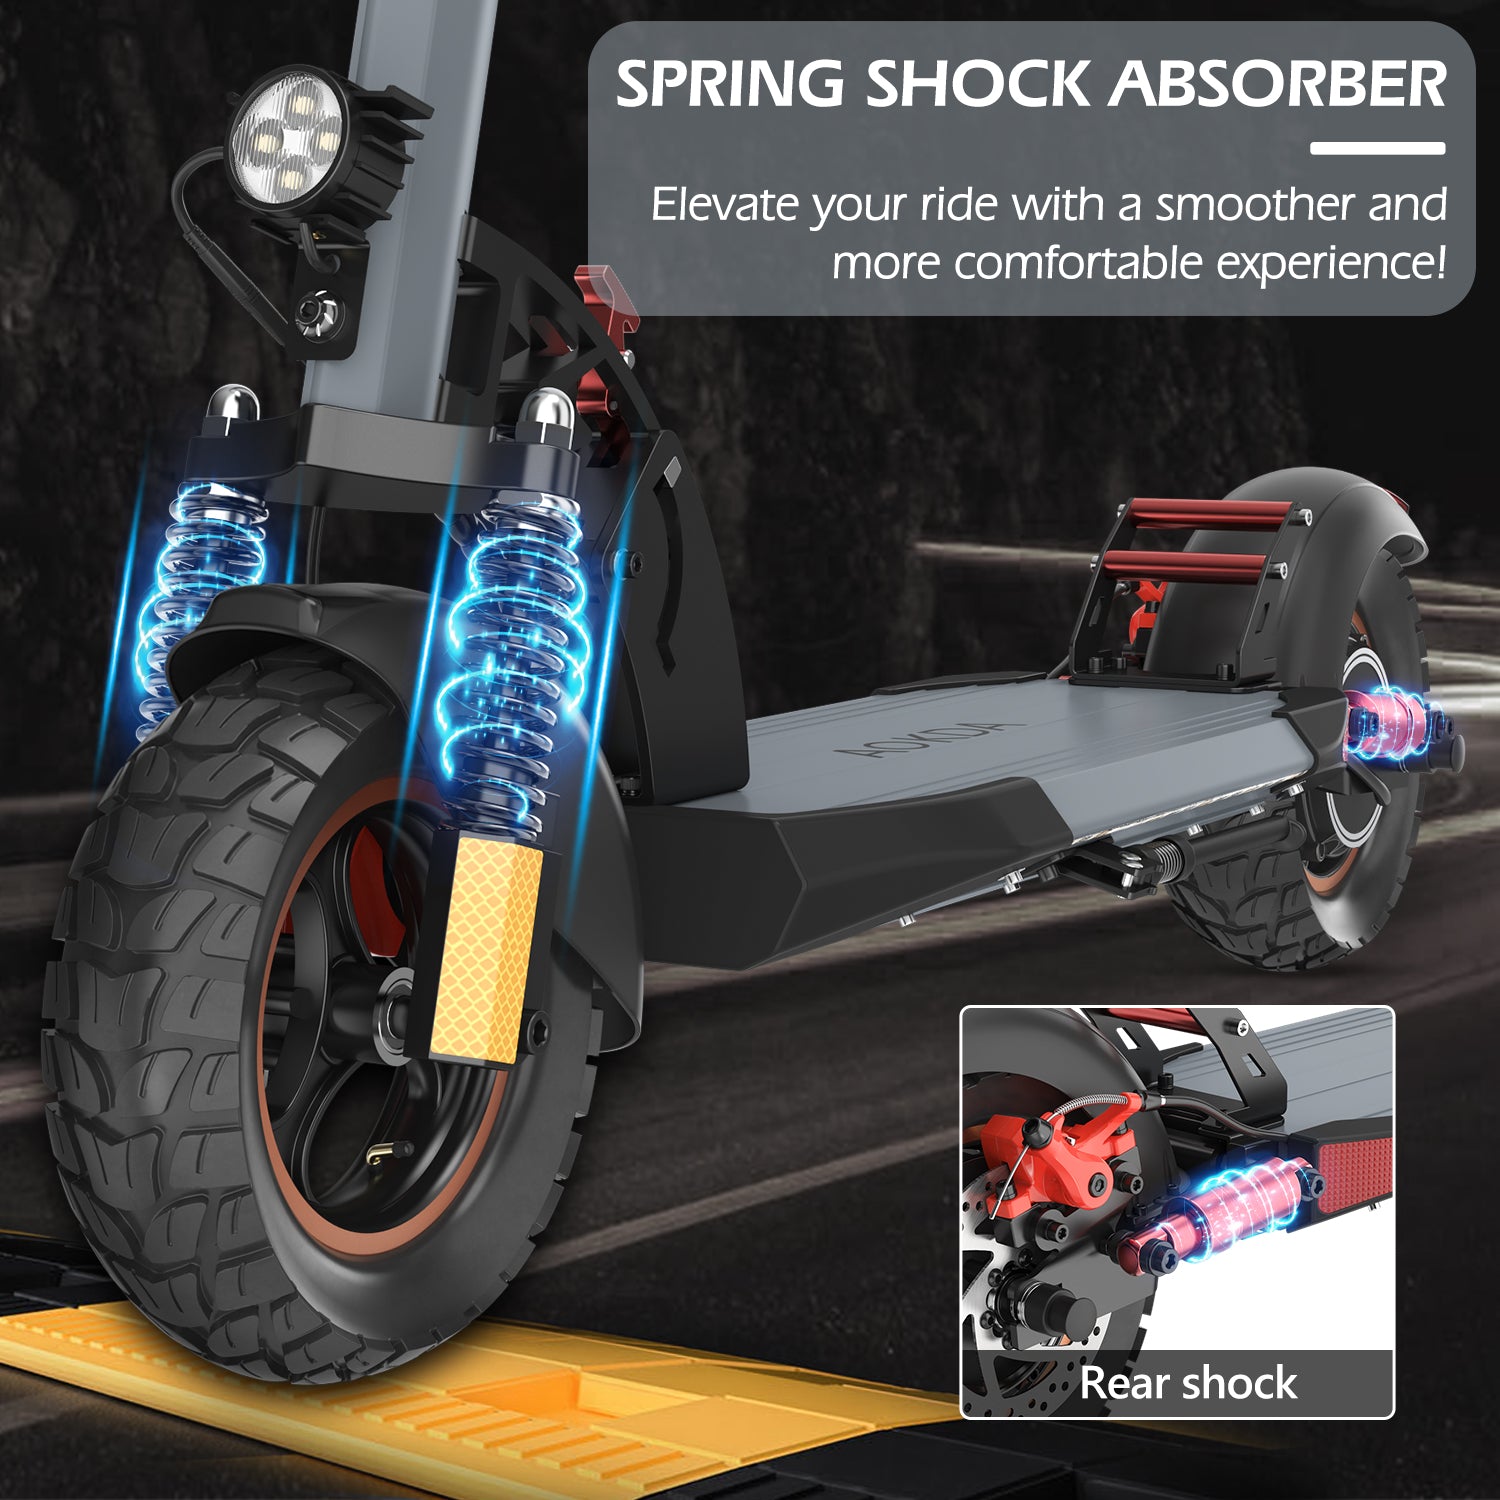 AOKDA A1 Commuting electric scooter with front and rear shock abosrption